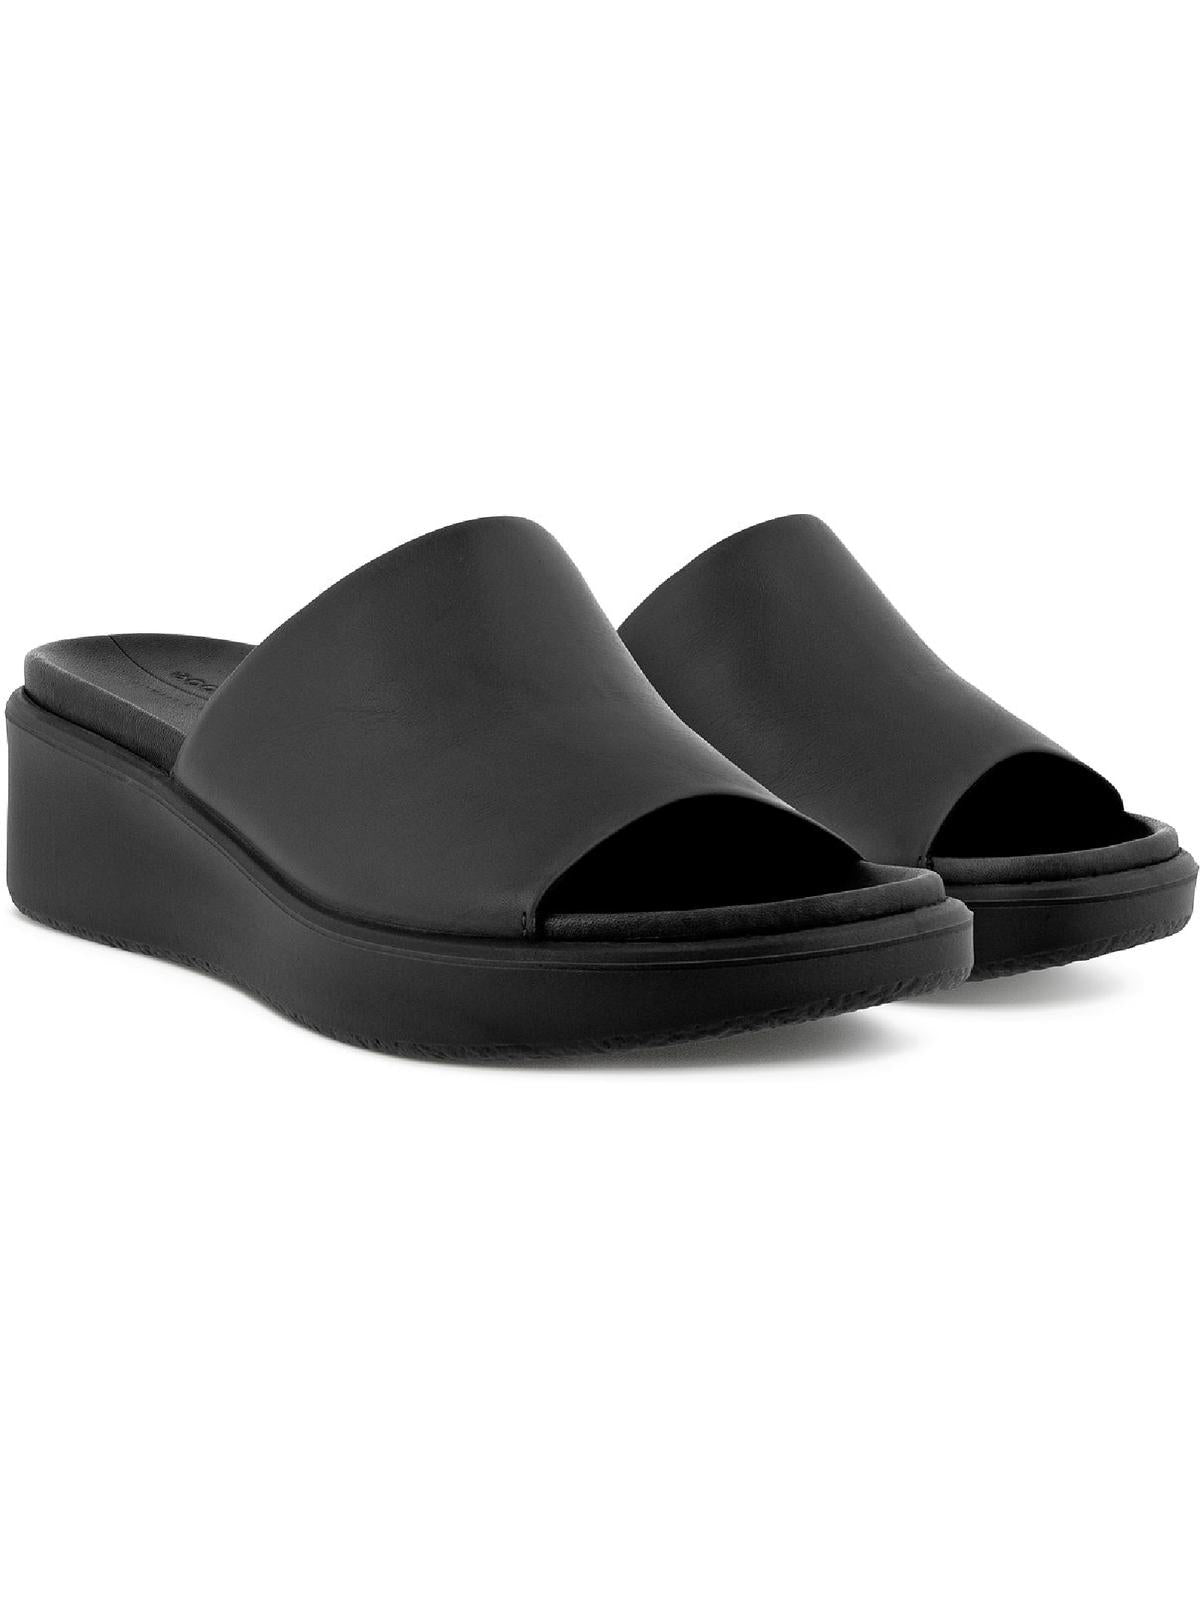 ECCO Flowt Womens Leather Slip On Wedge Sandals